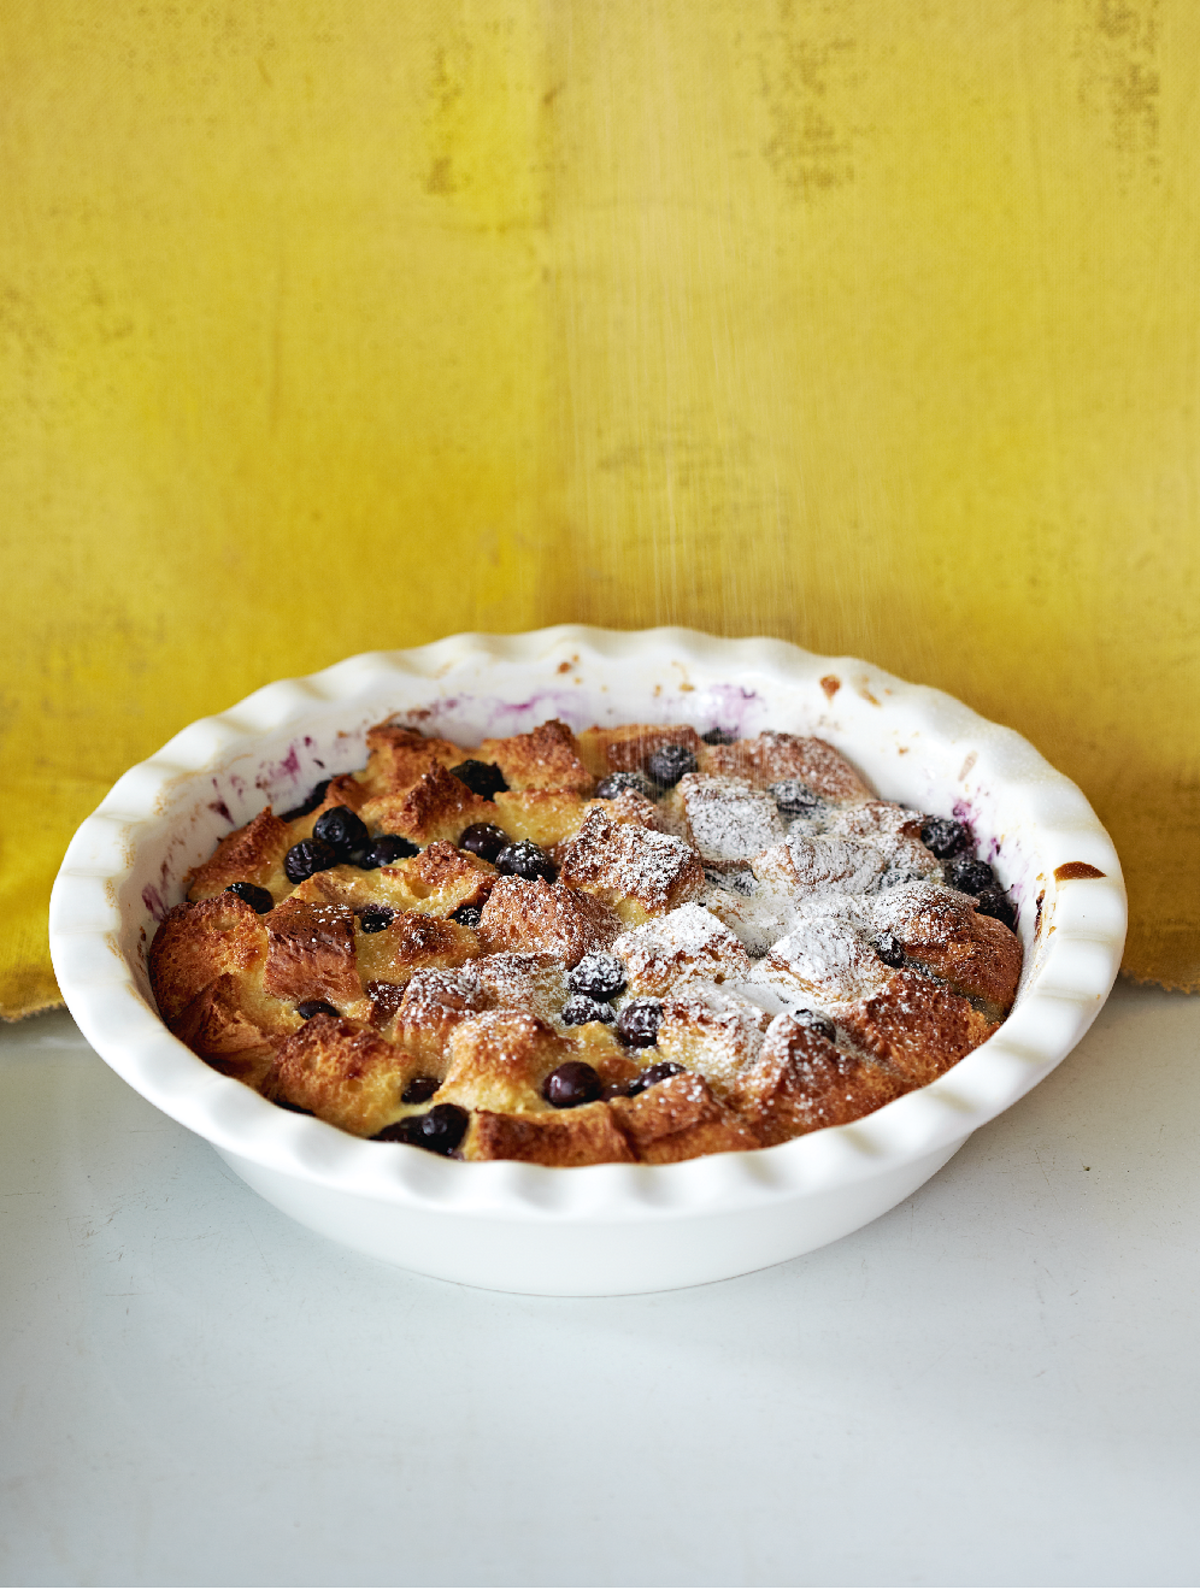 Blueberry and Lemon Bread Pudding